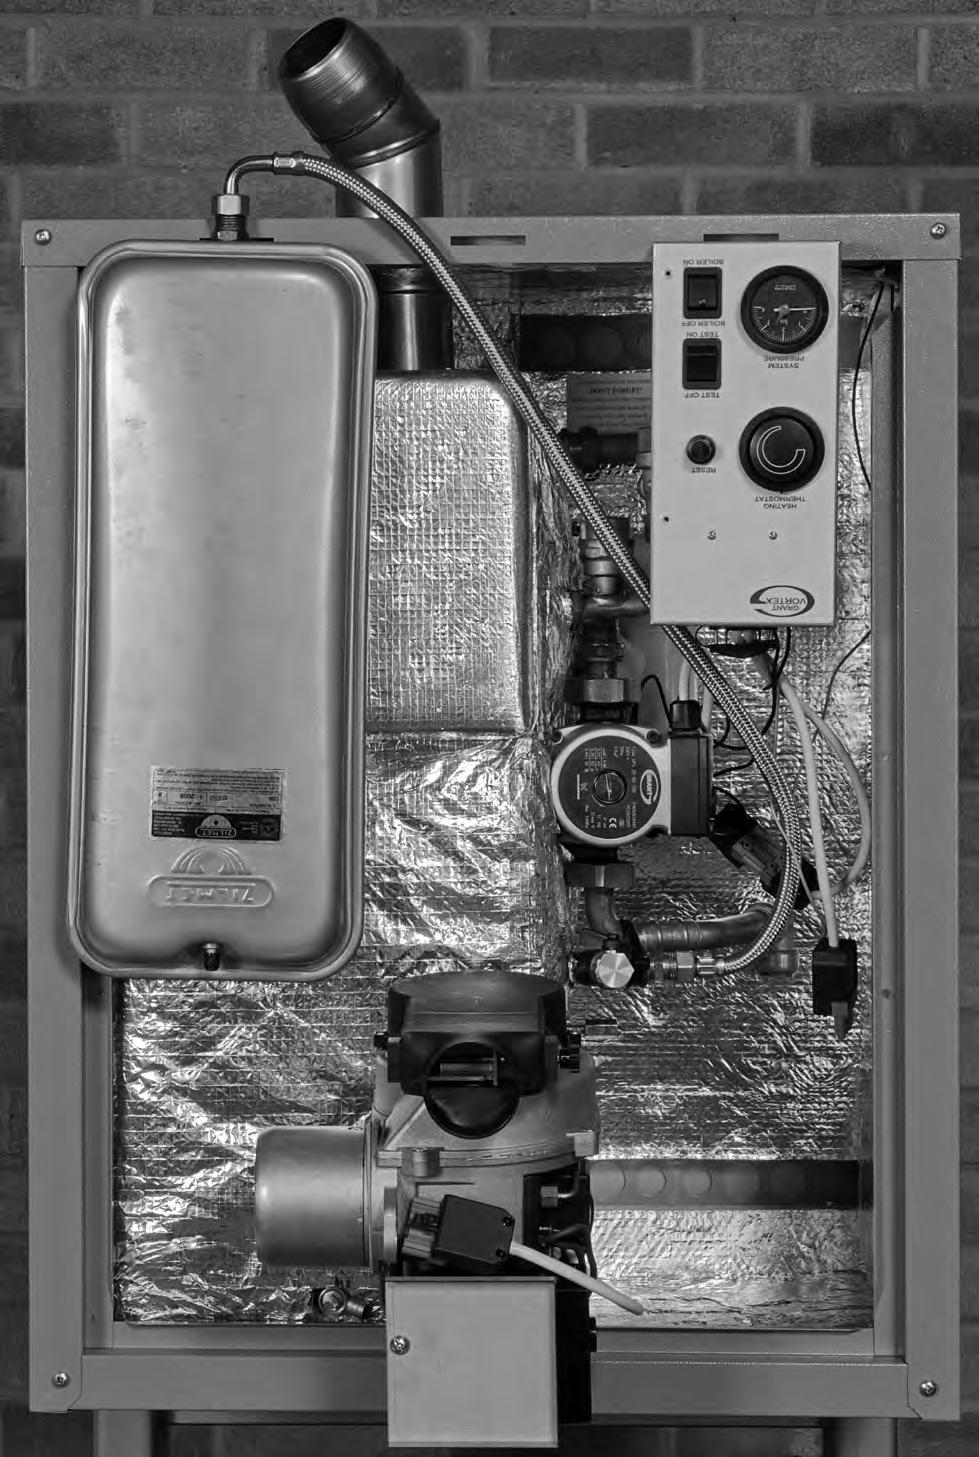 The boiler is fitted with an overheat thermostat (which allows it to be used on a sealed central heating system) which will automatically switch off the boiler if the heat exchanger exceeds a pre-set